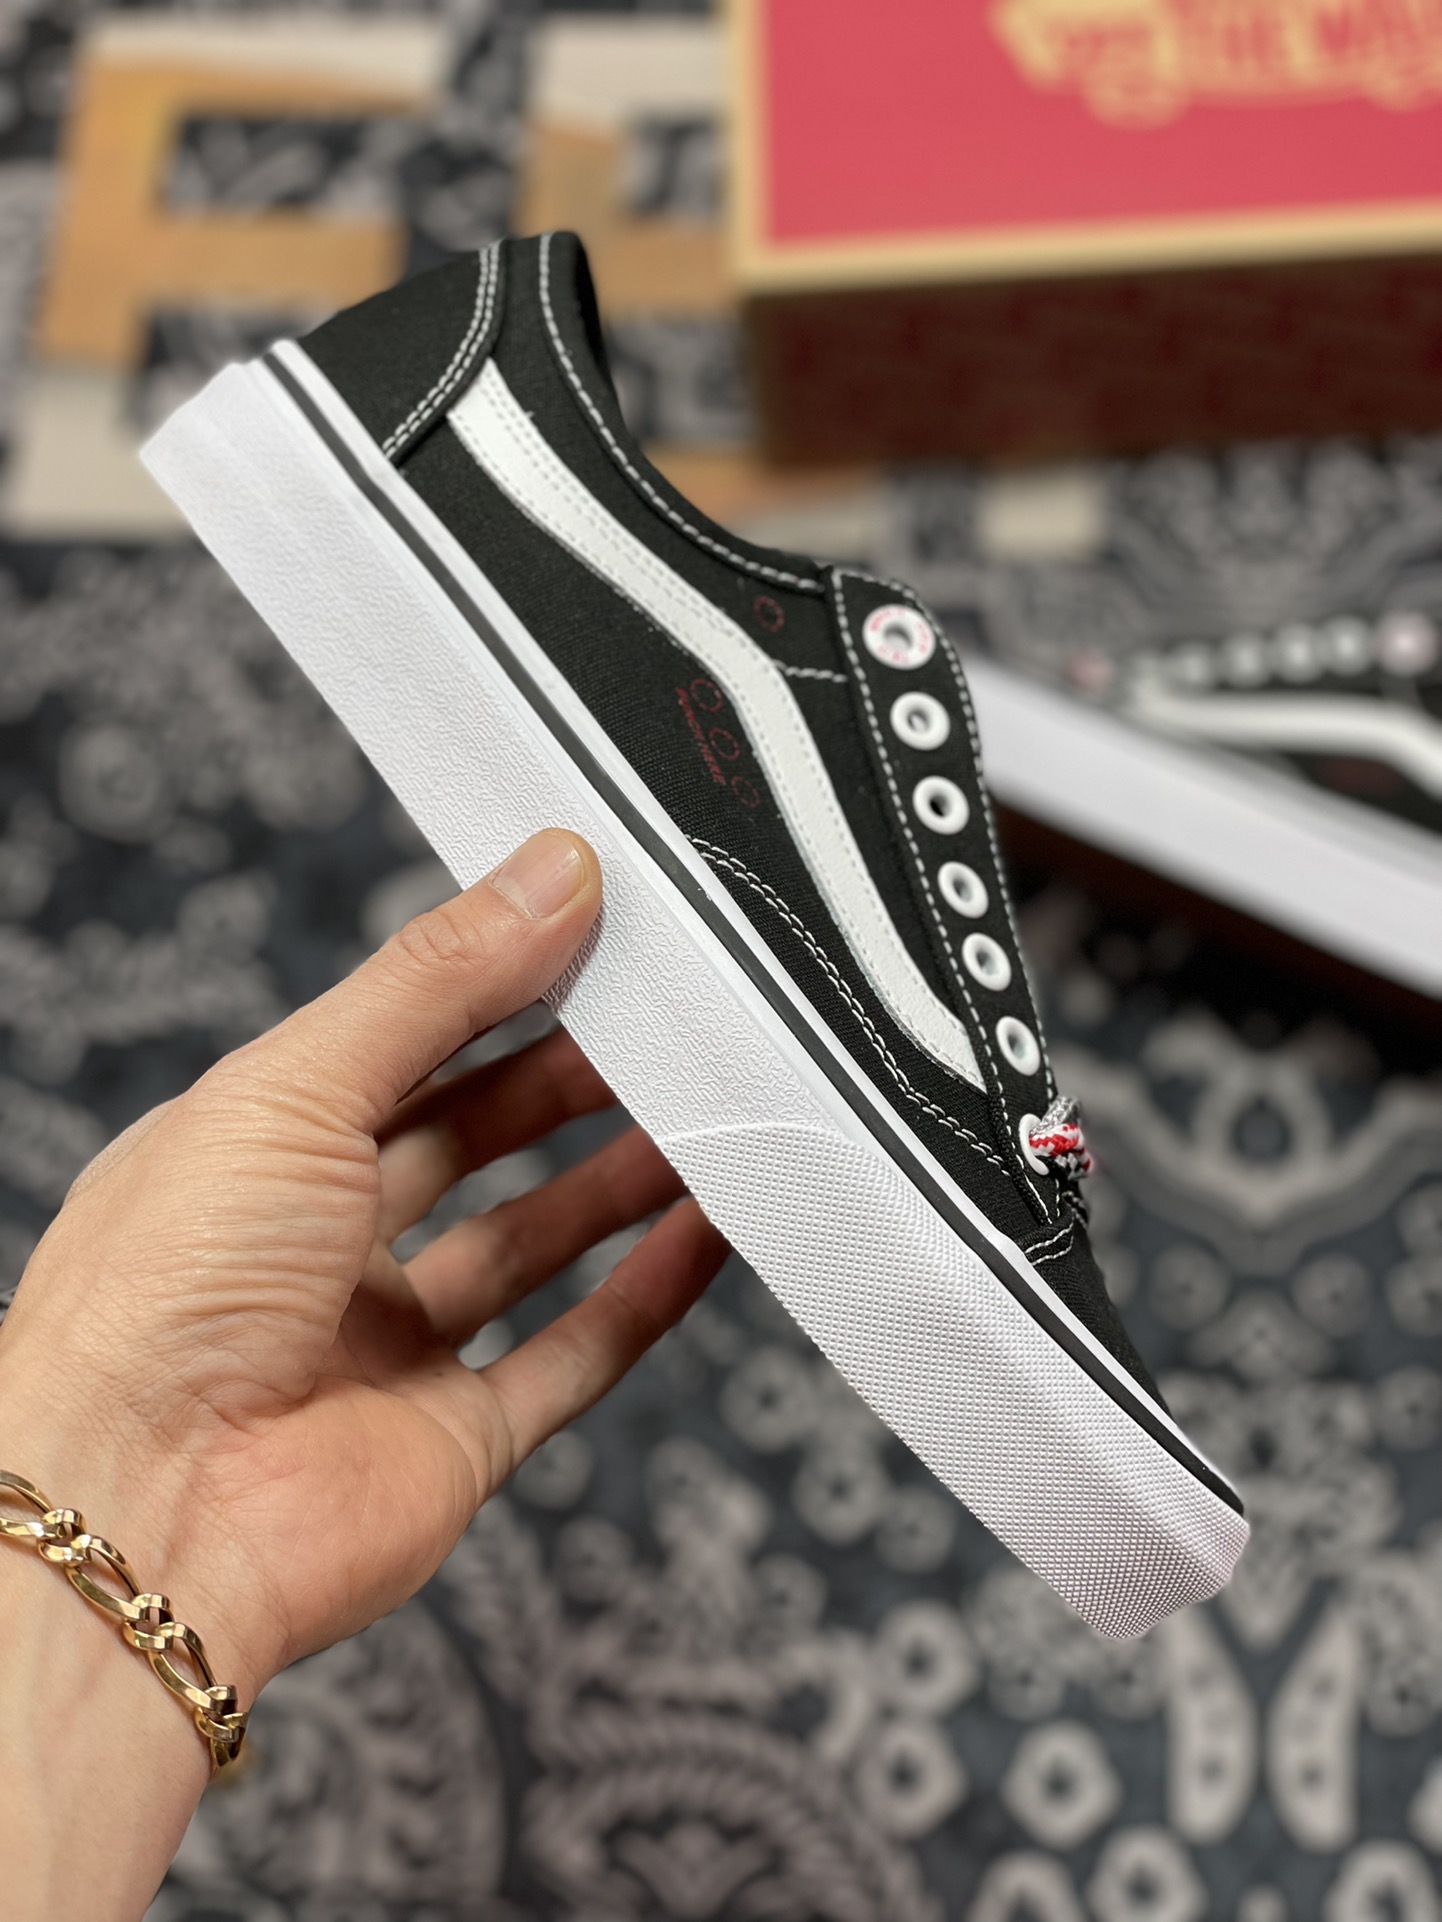 Vans Old Skool black and white lined checkerboard VN0A54F49Y4